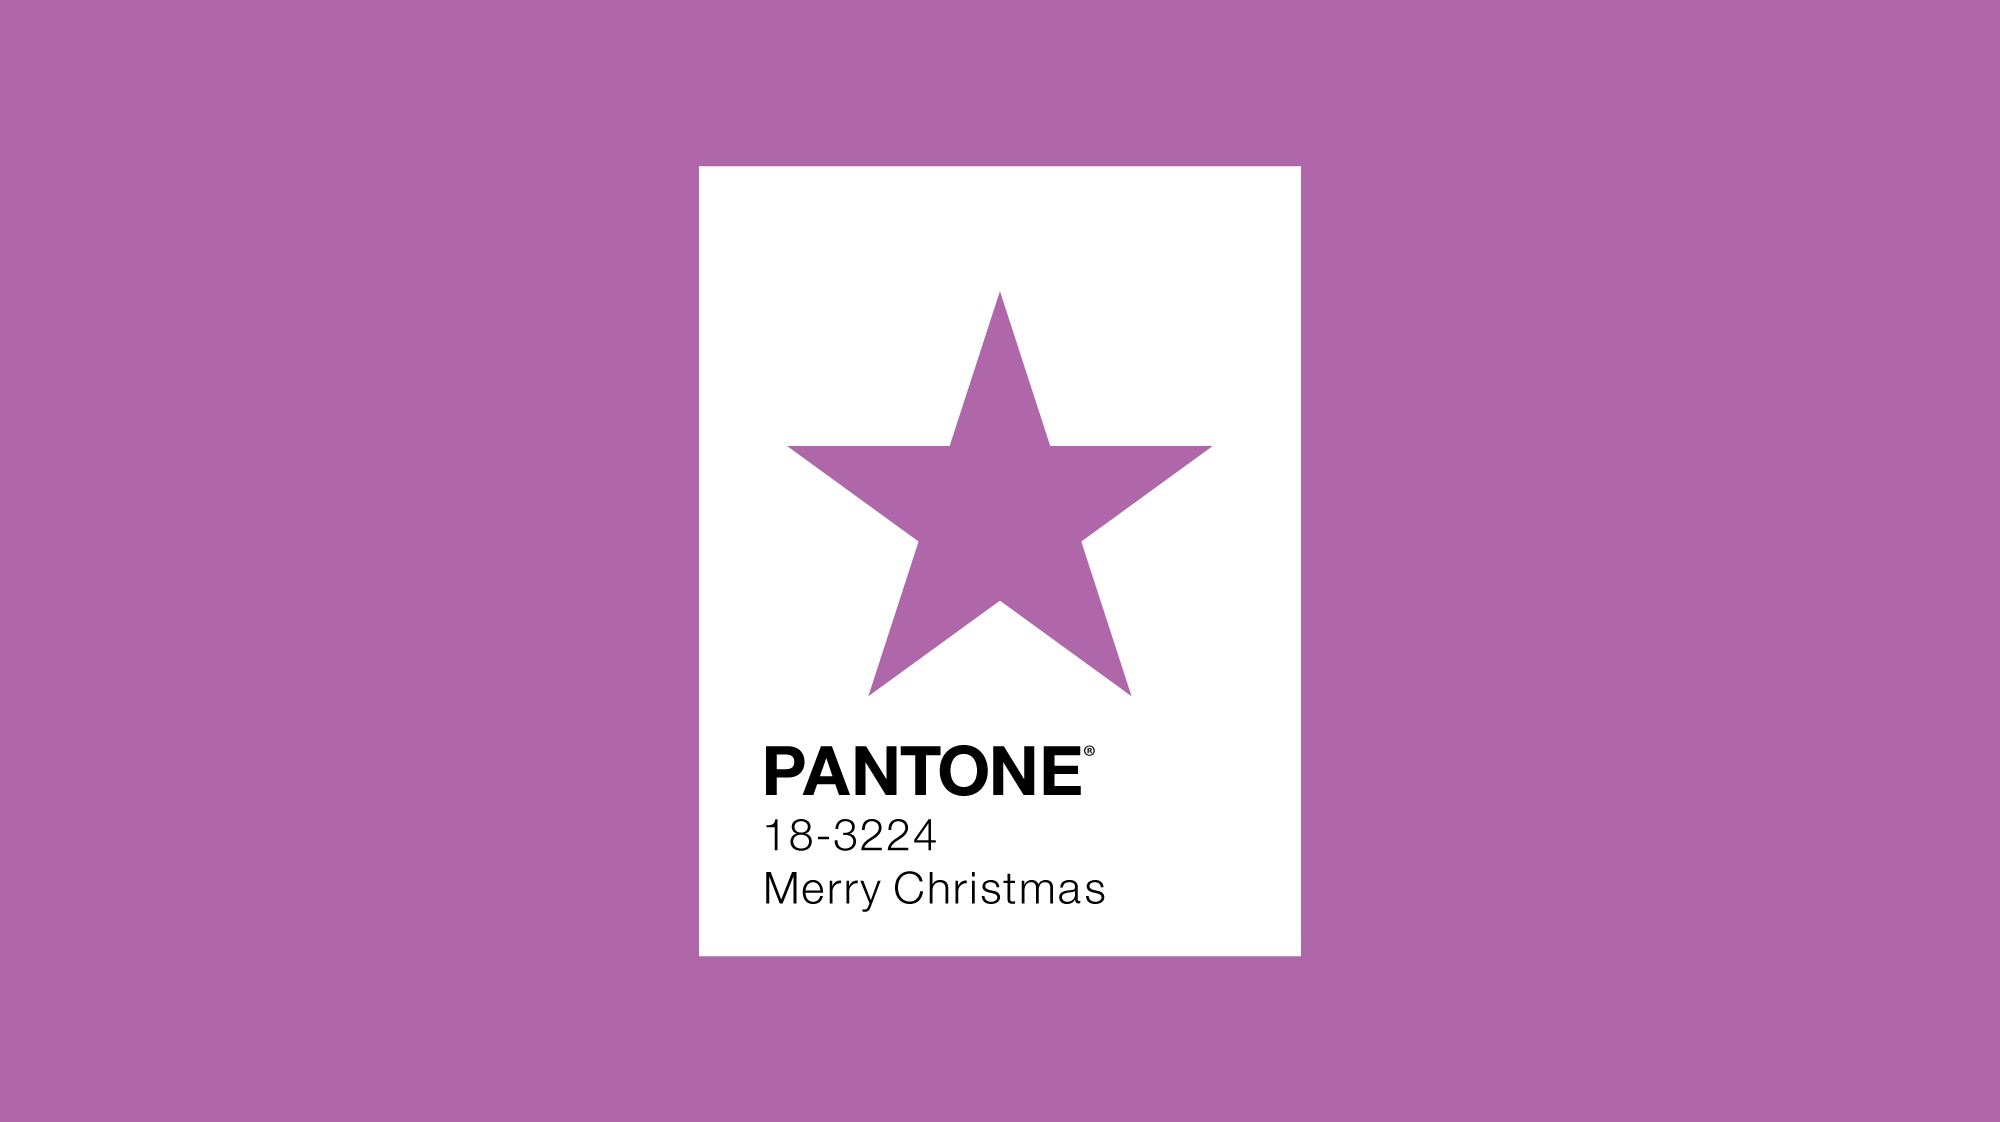 Pantone colour of the year 2014 minimal design with star